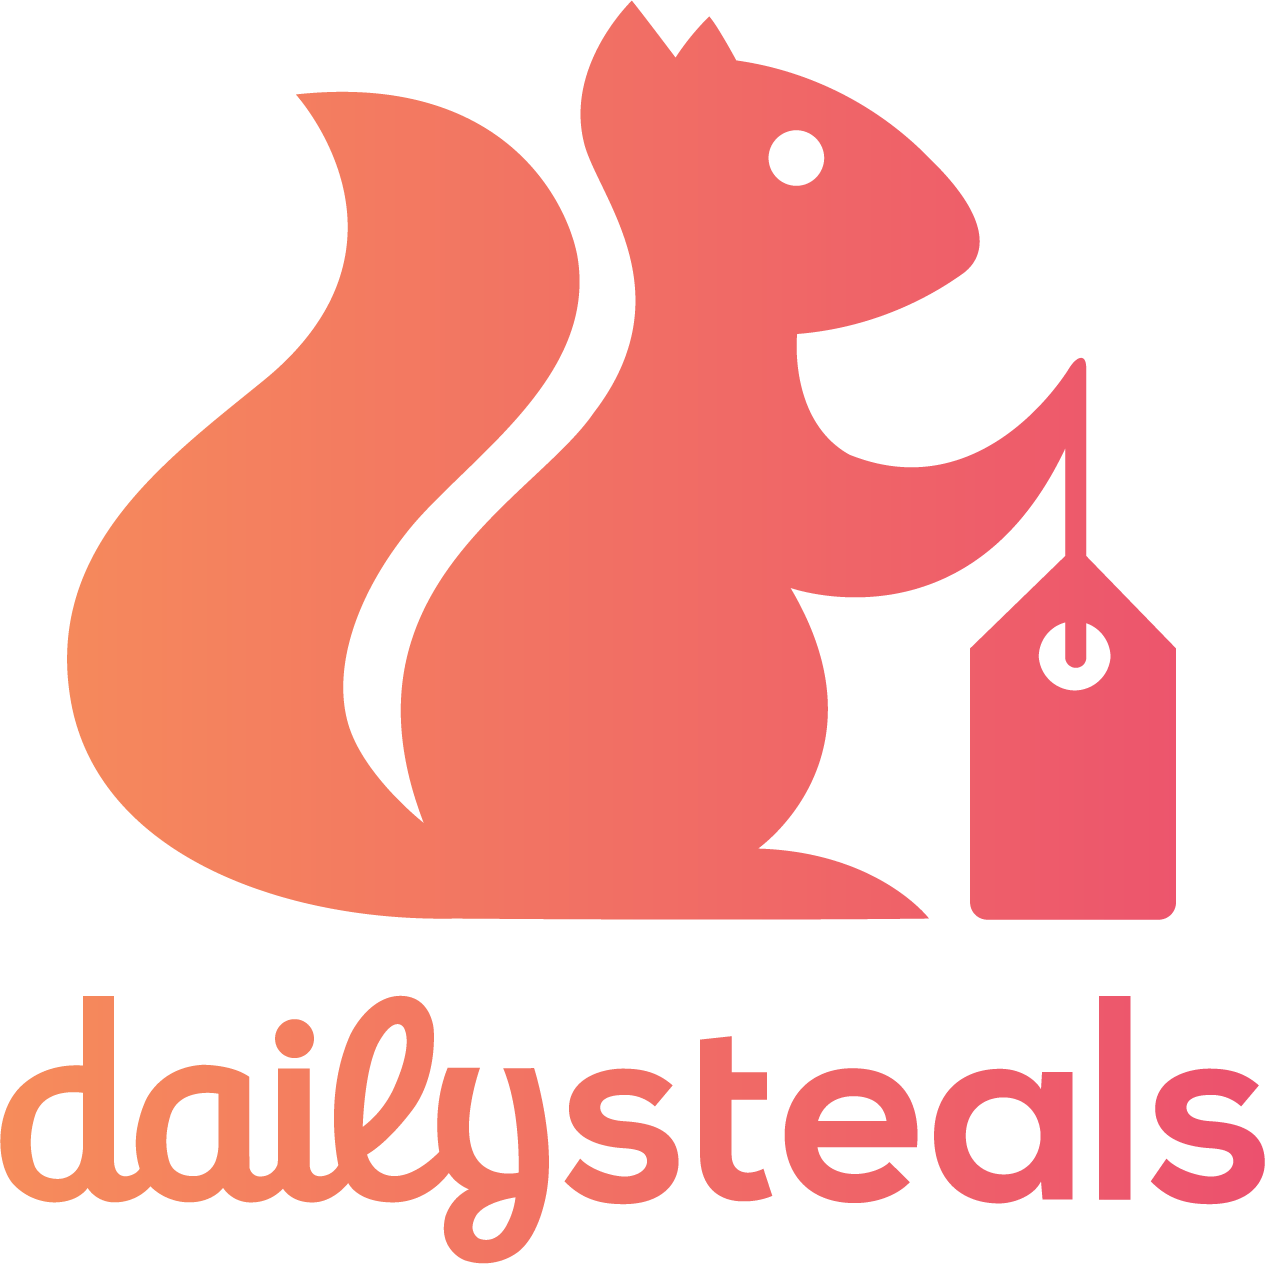 Daily Steals logo